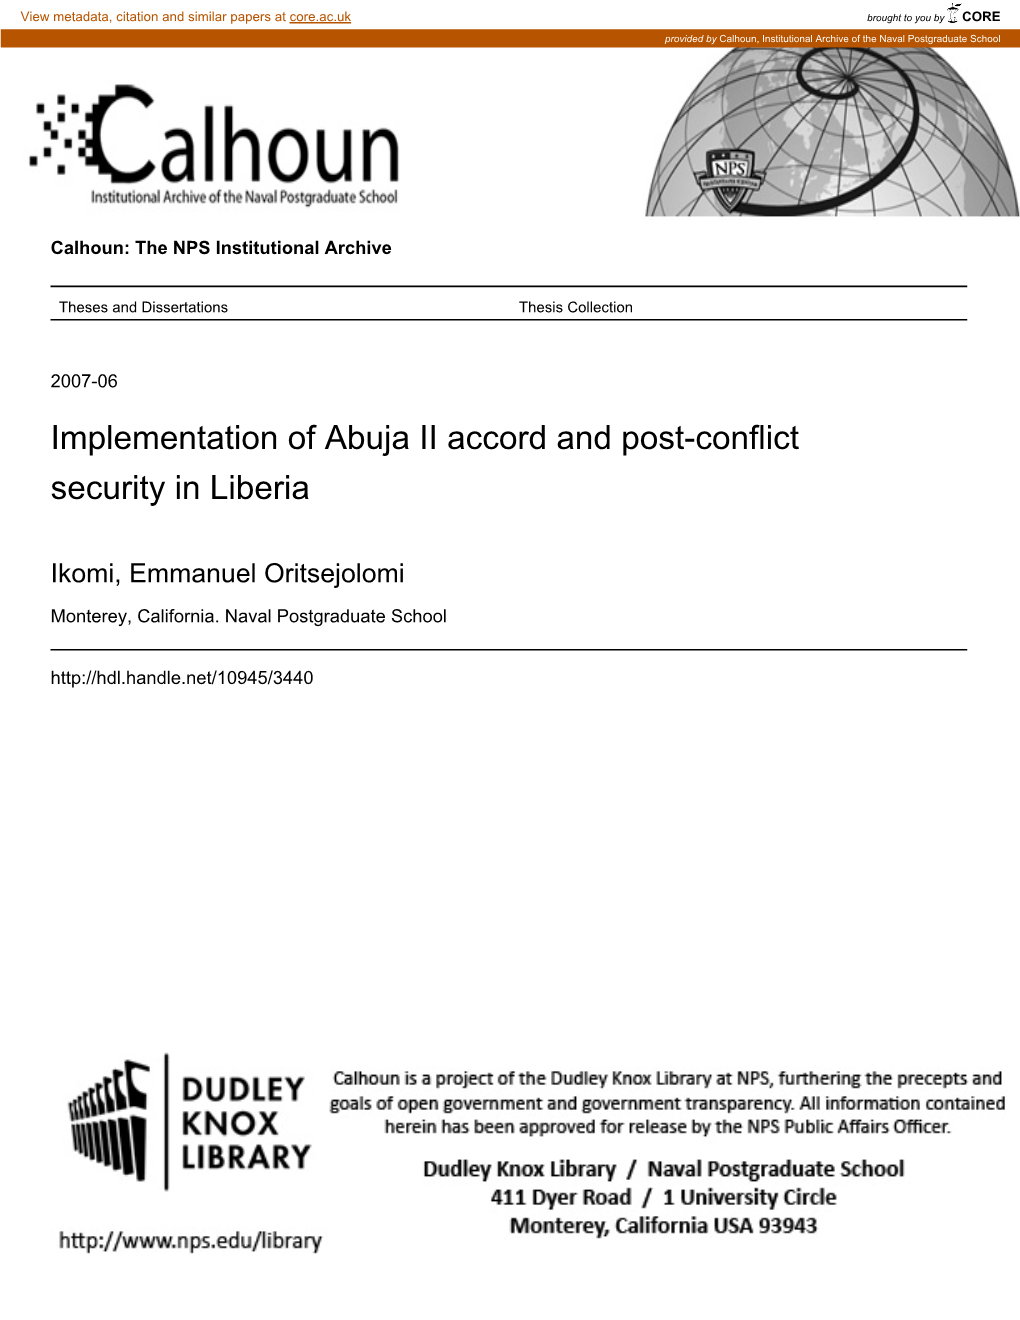 Implementation of Abuja II Accord and Post-Conflict Security in Liberia